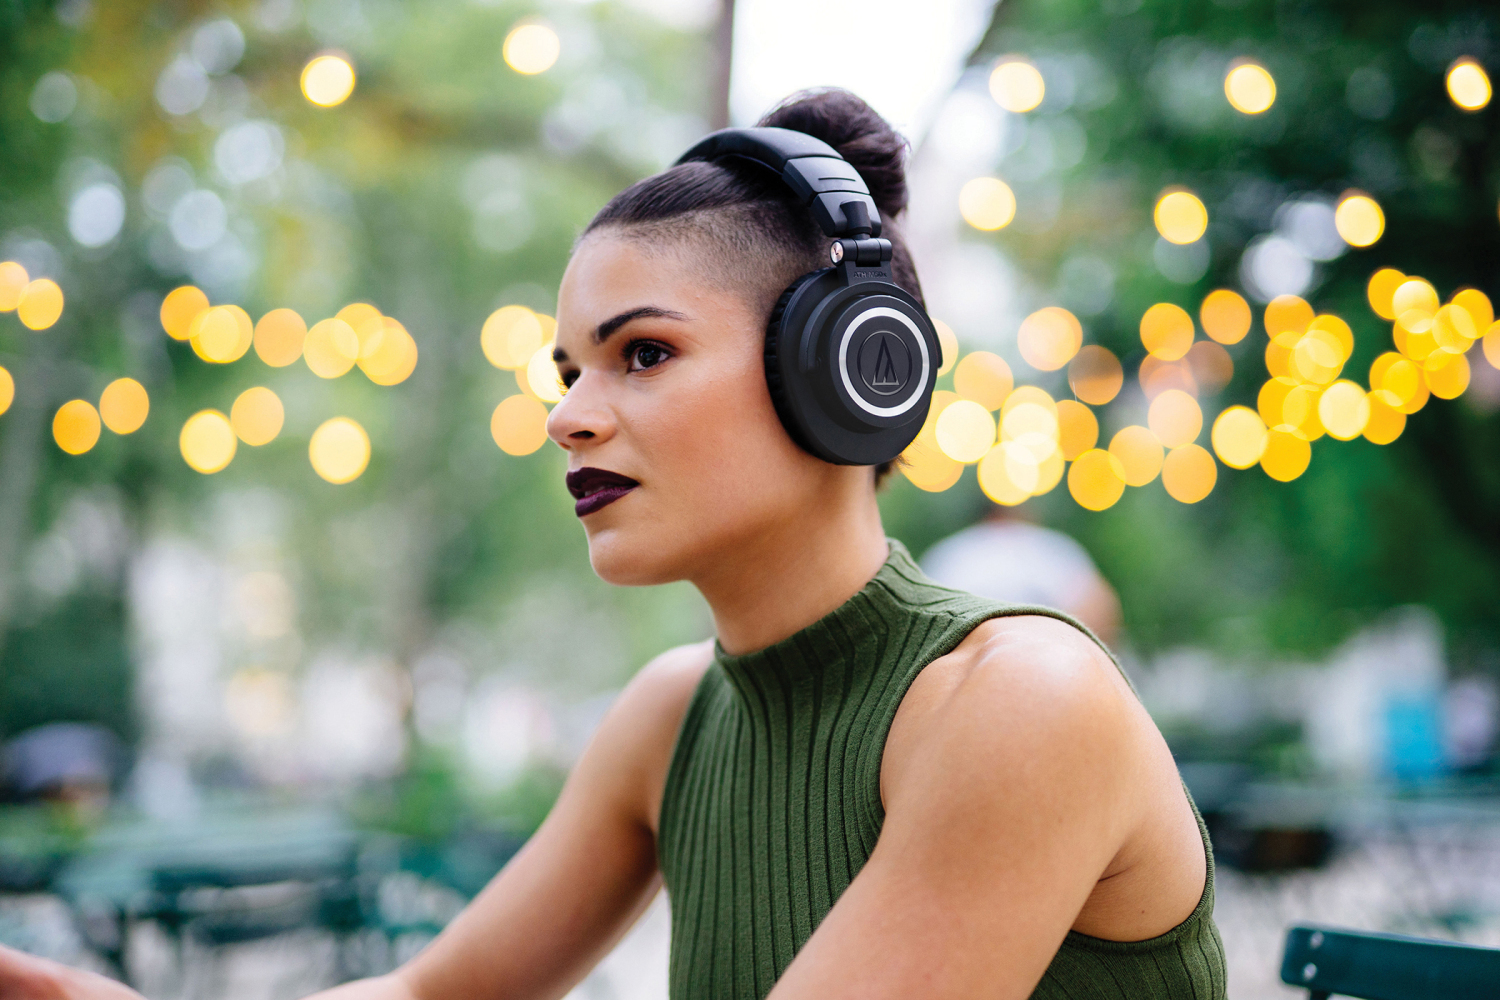 Audio-Technica ATH-M50xBT lifestyle image of headphones worn by woman sitting outdoors.